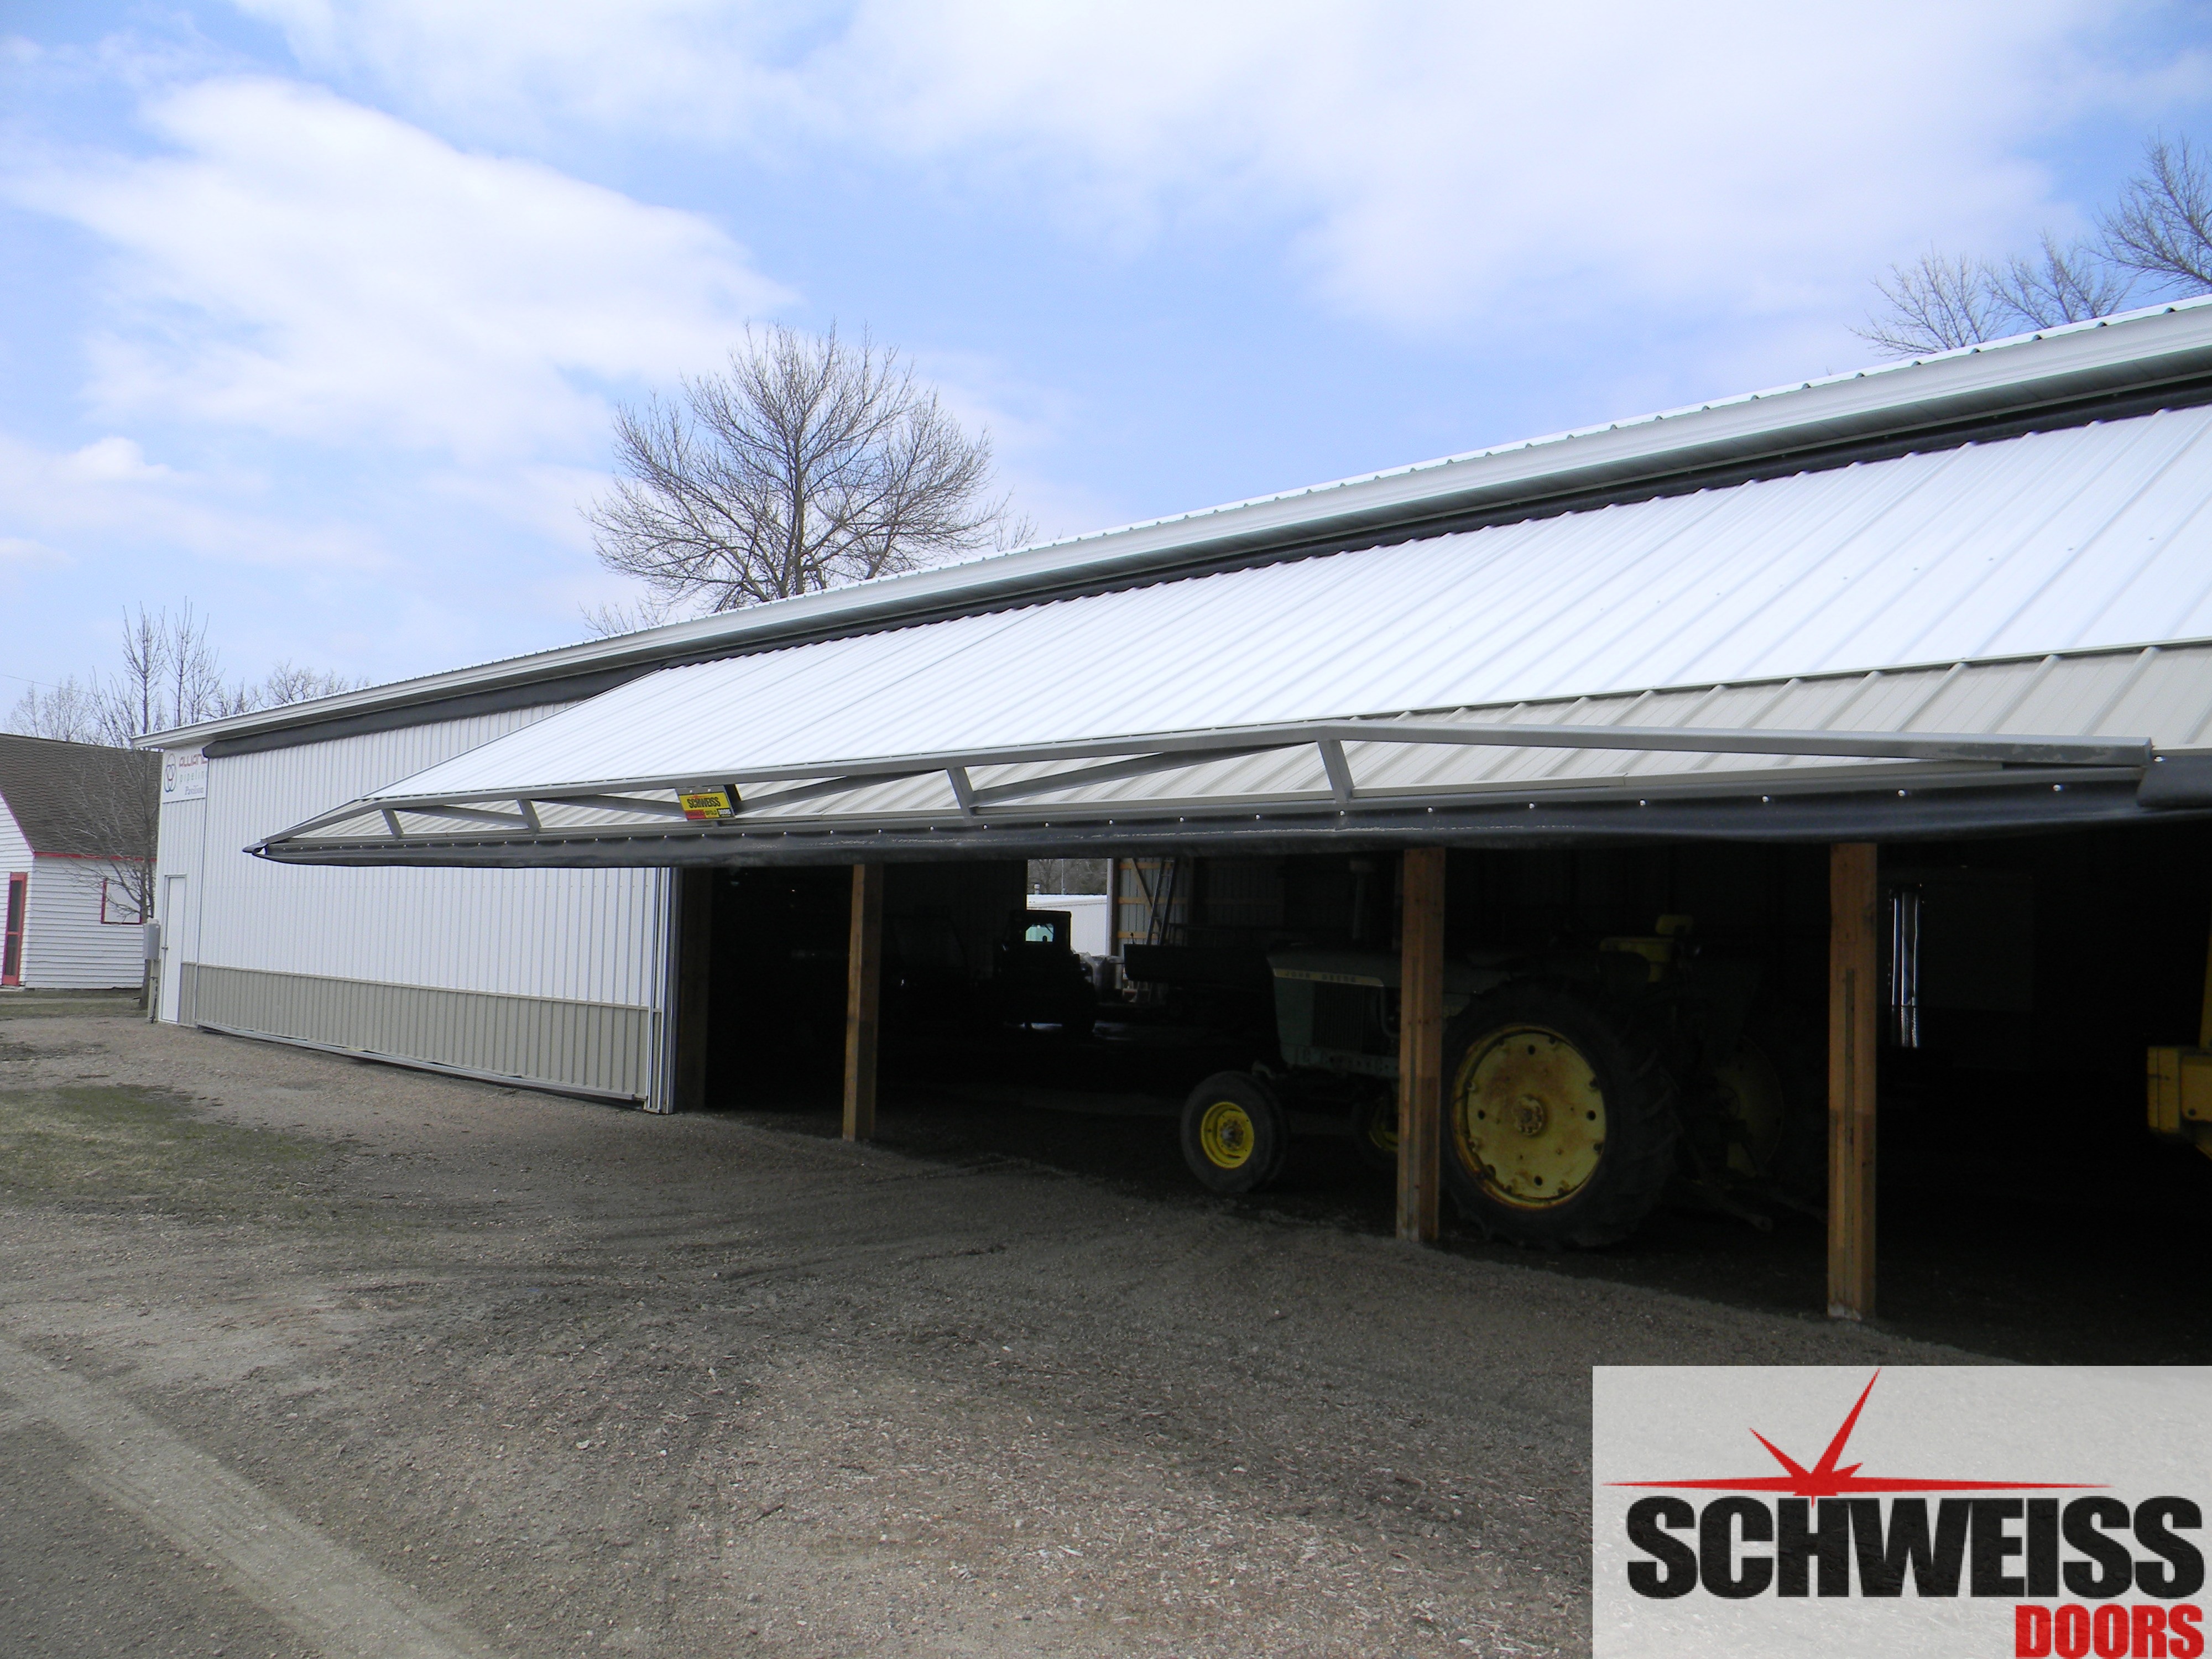 Schweiss Hydraulic doors by Schweiss are perfect for pole buildings on the sidewalls and the endwalls.